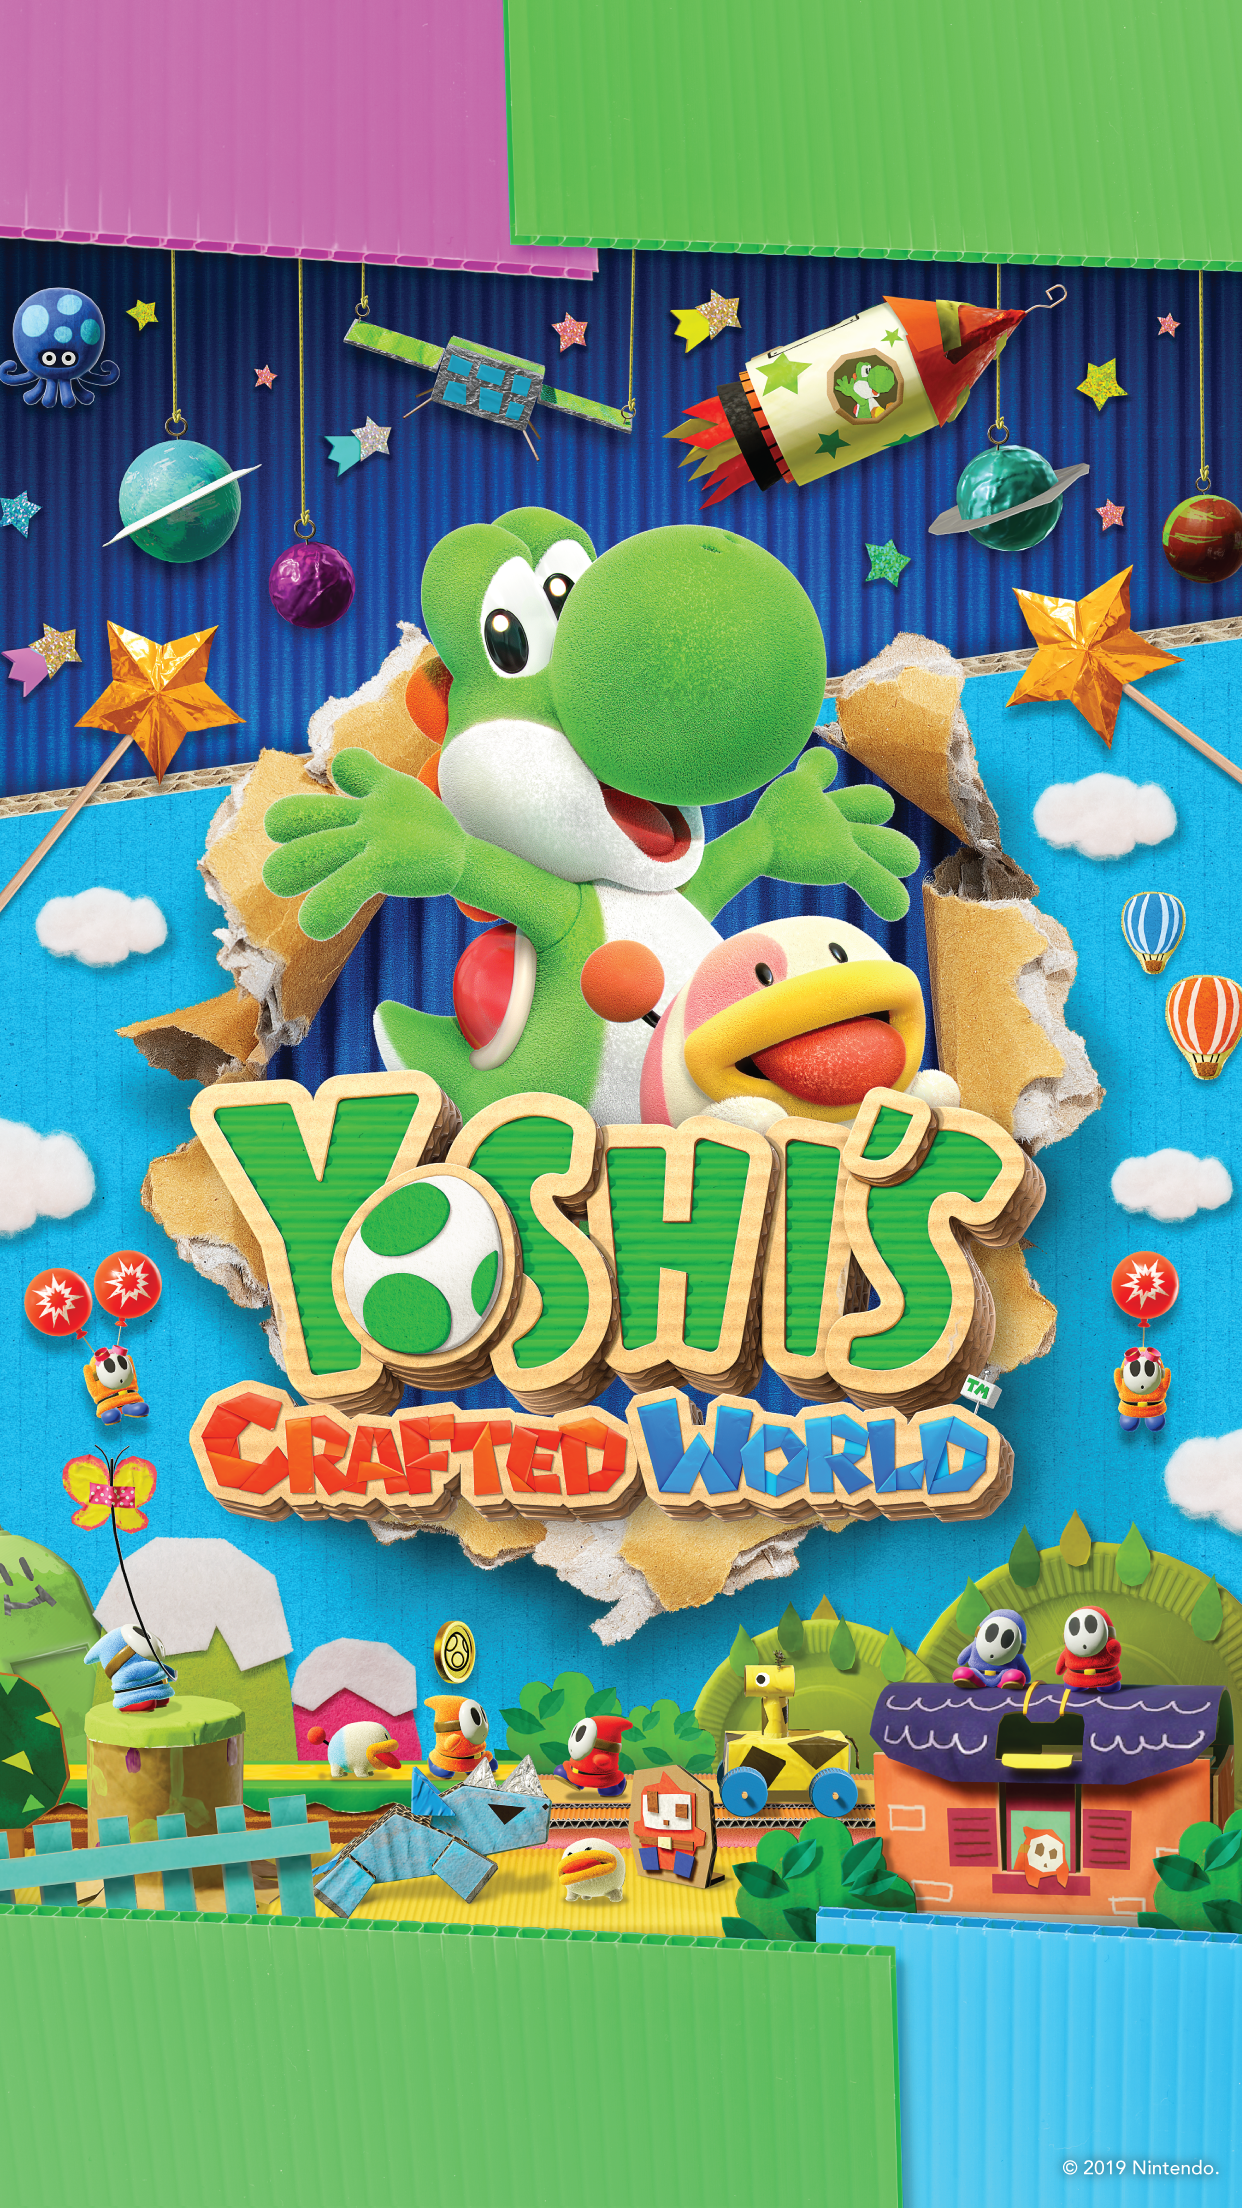 General 1242x2208 Yoshi Nintendo Switch video game characters video games Nintendo video game art smiling hot air balloons stars satellite rocket portrait display 2019 (year) shooting stars planet watermarked open arms title Yoshi's Crafted World balloon cardboard digital art leaves Shy Guy